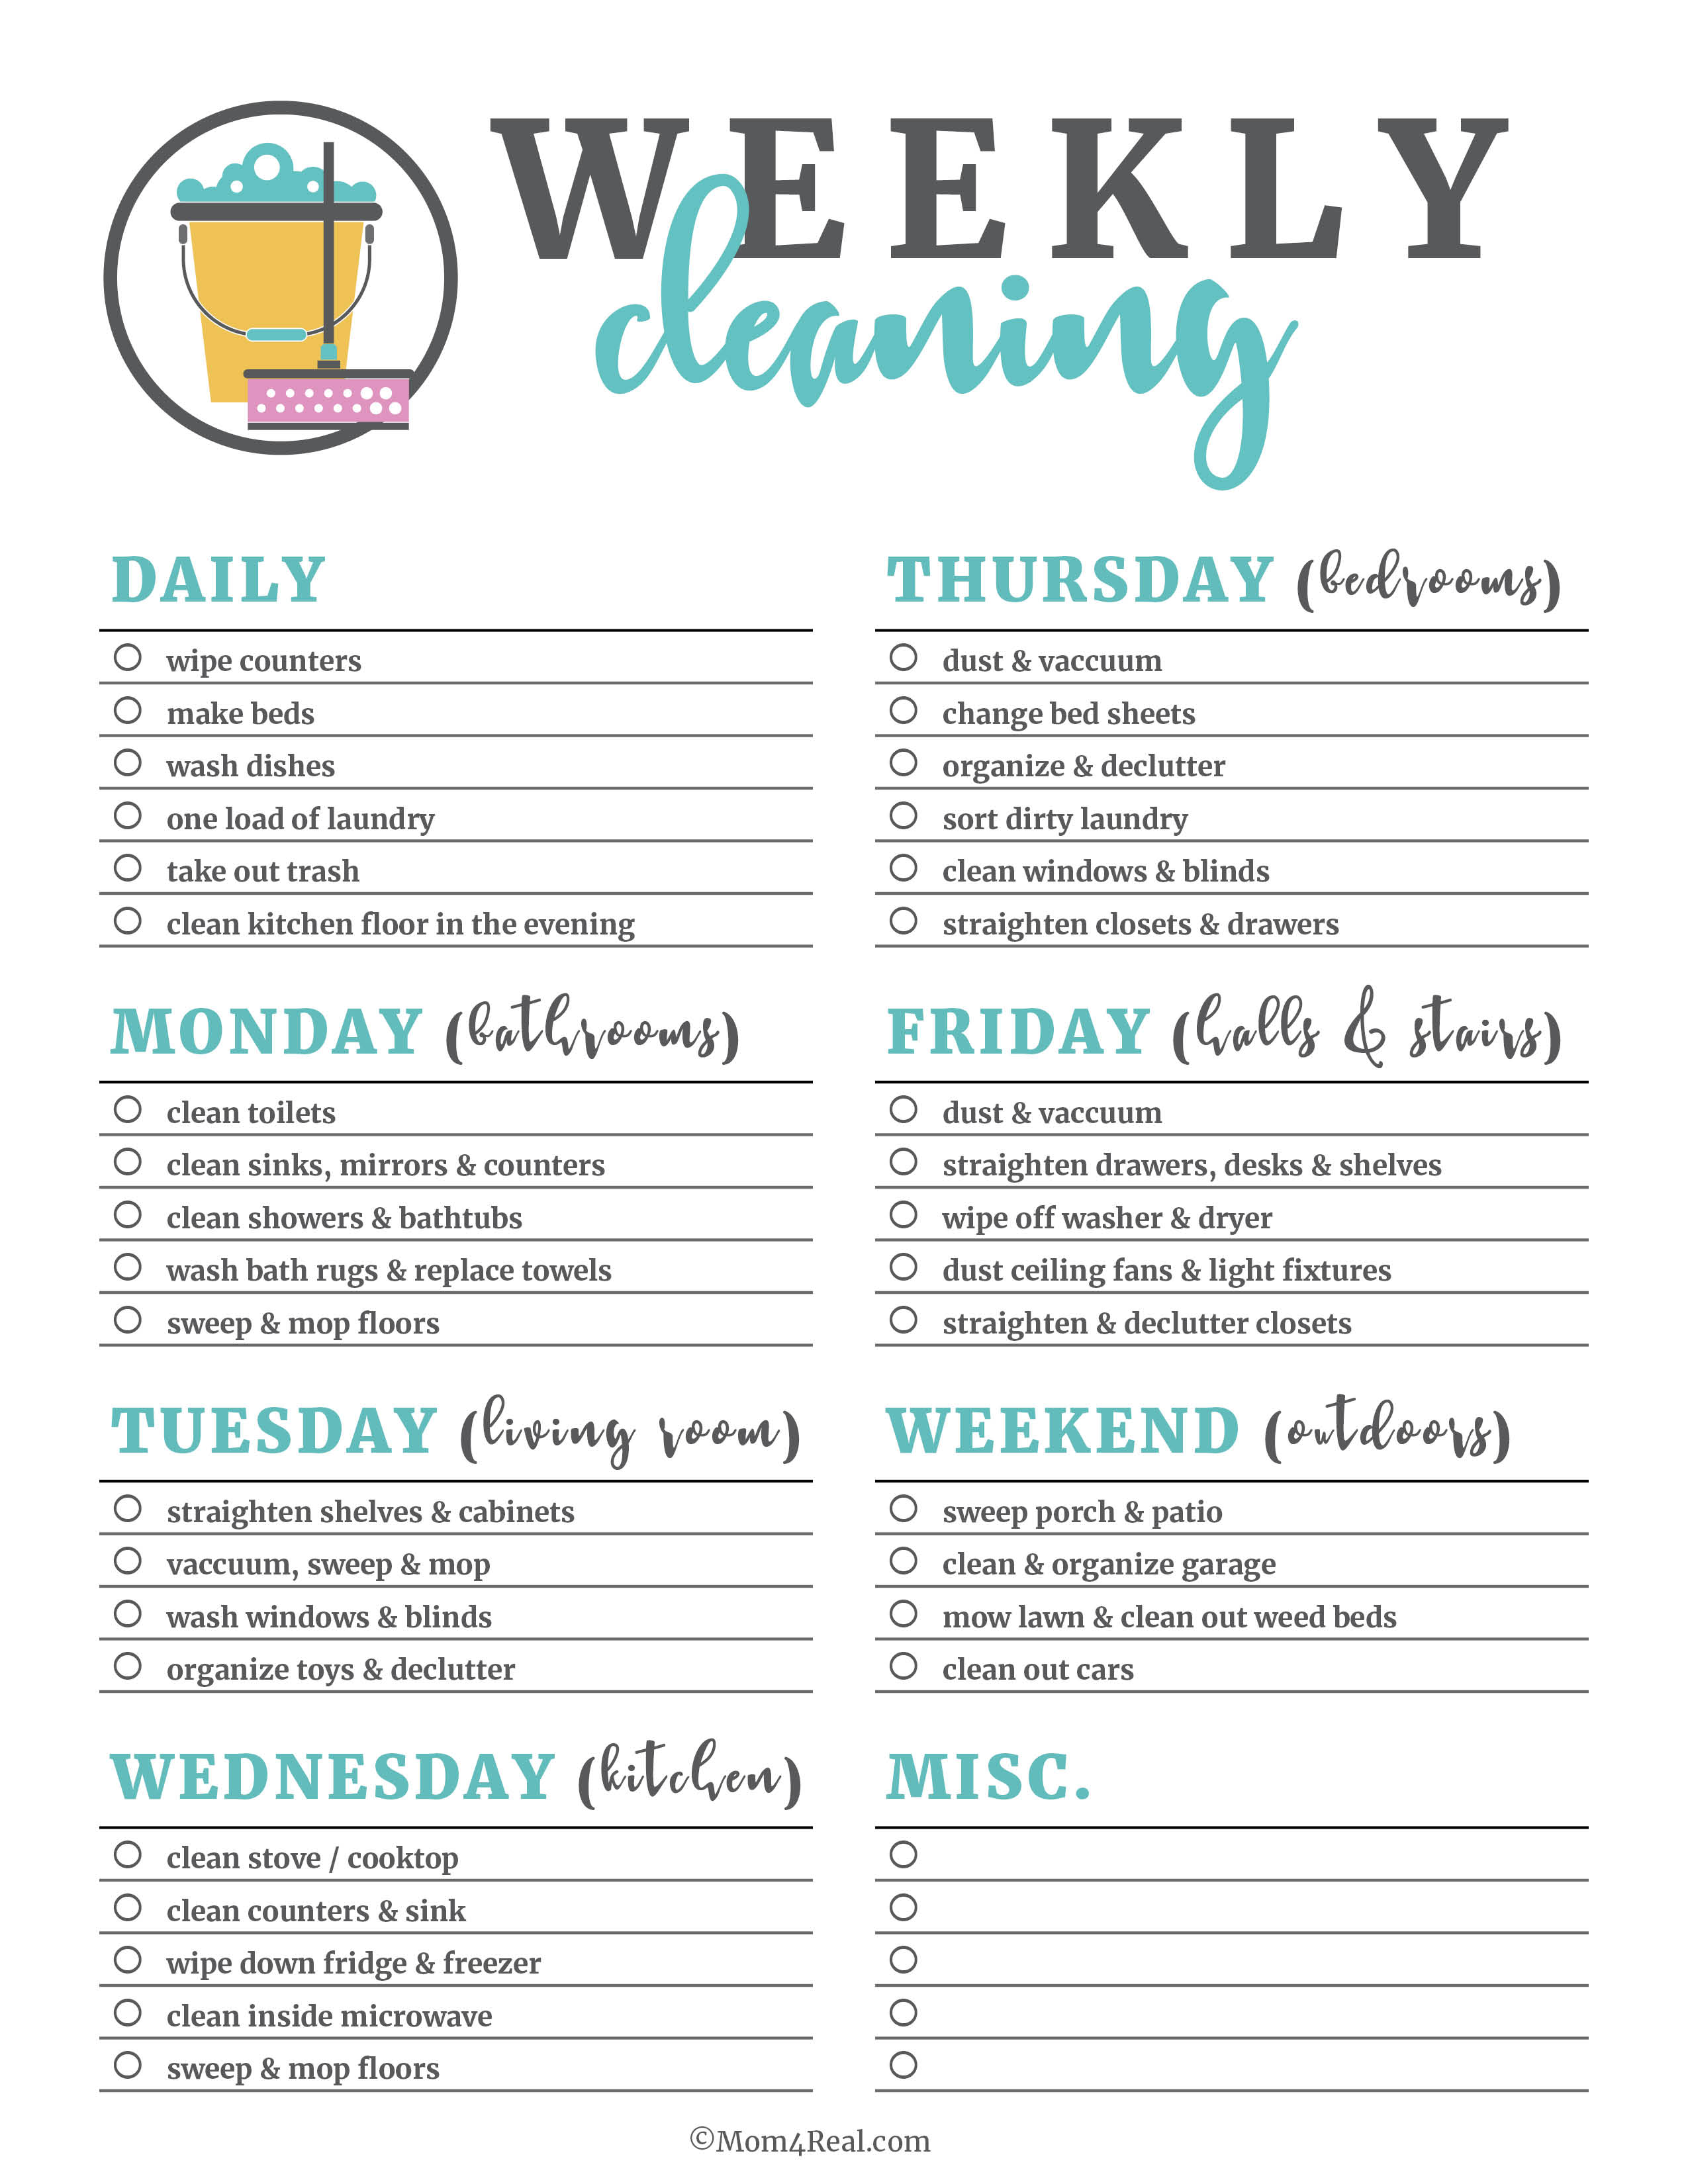 Printable Cleaning Checklists for Daily, Weekly and Monthly Cleaning